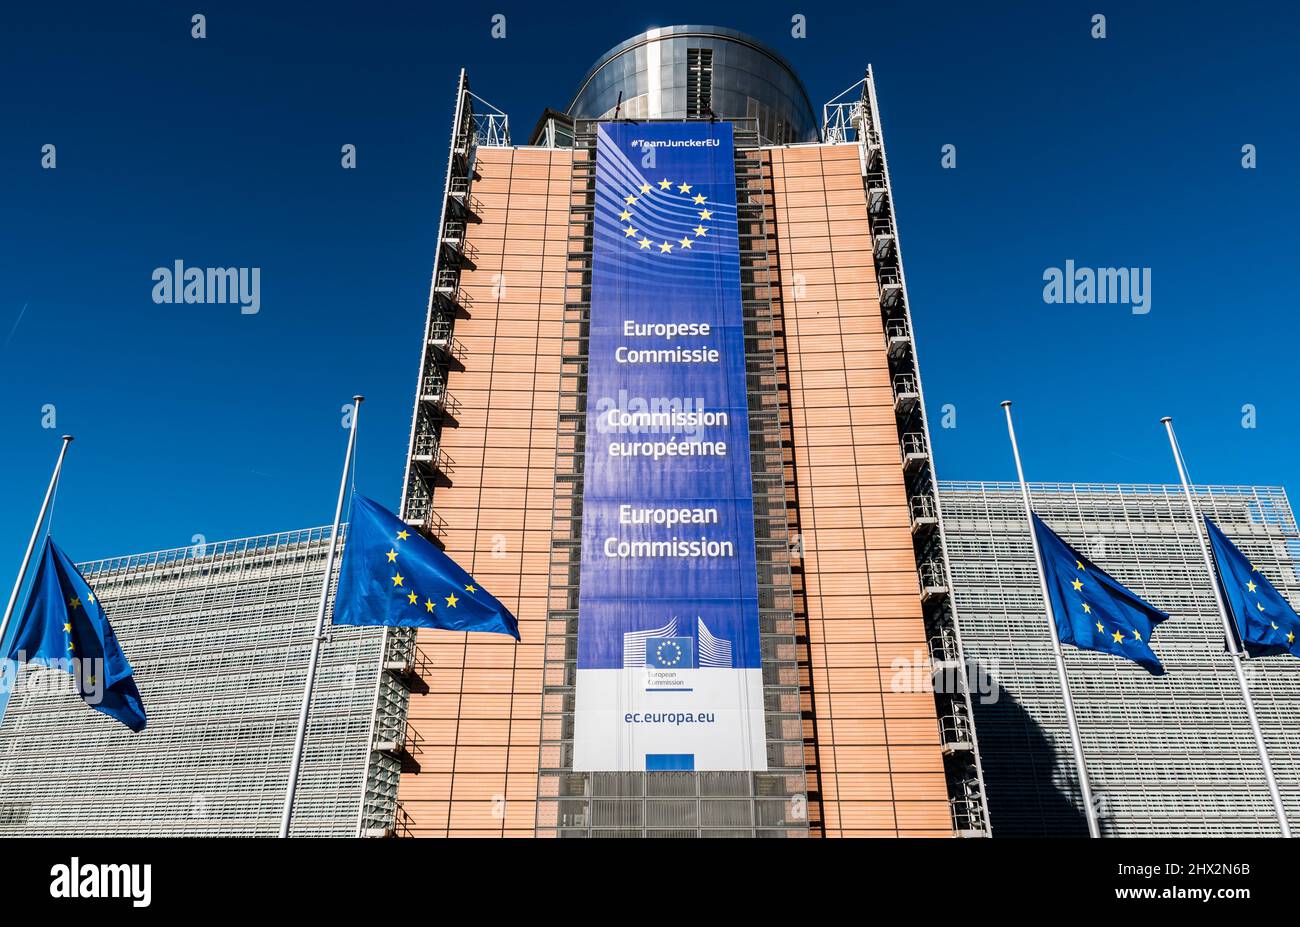 City of Brussels - Belgium9: Wide angle view of the facade of the Berlaymont building, headquarters of the European commission. Stock Photo